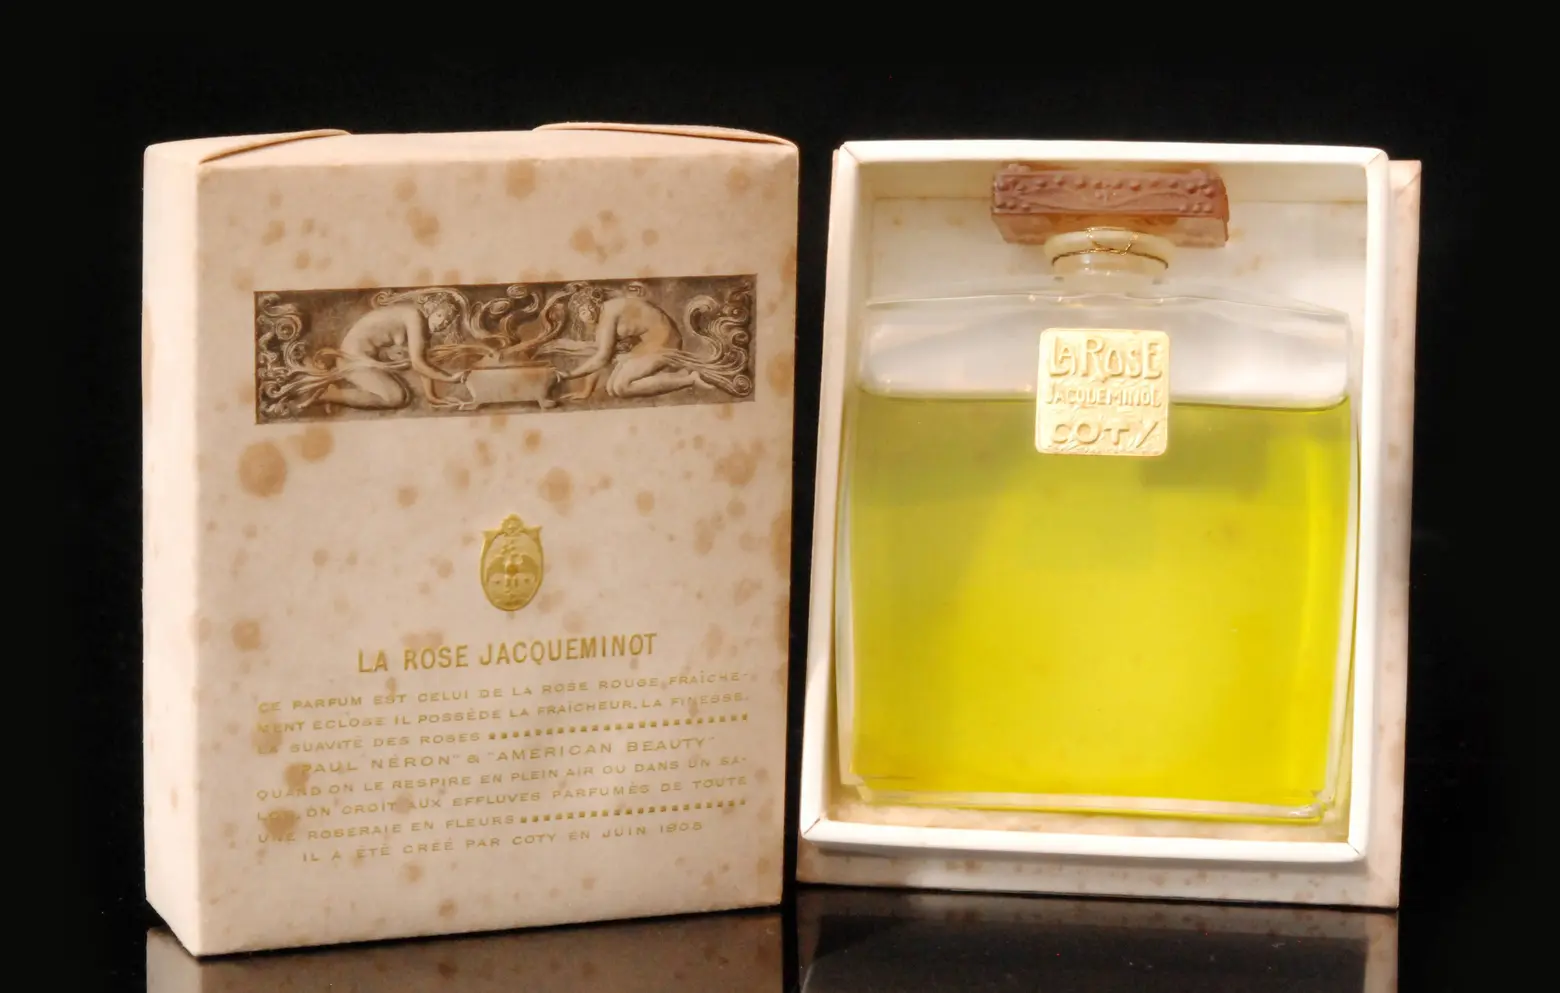 Coty, Vintage bottle and box for La Rose Jacqueminot perfume, 1904